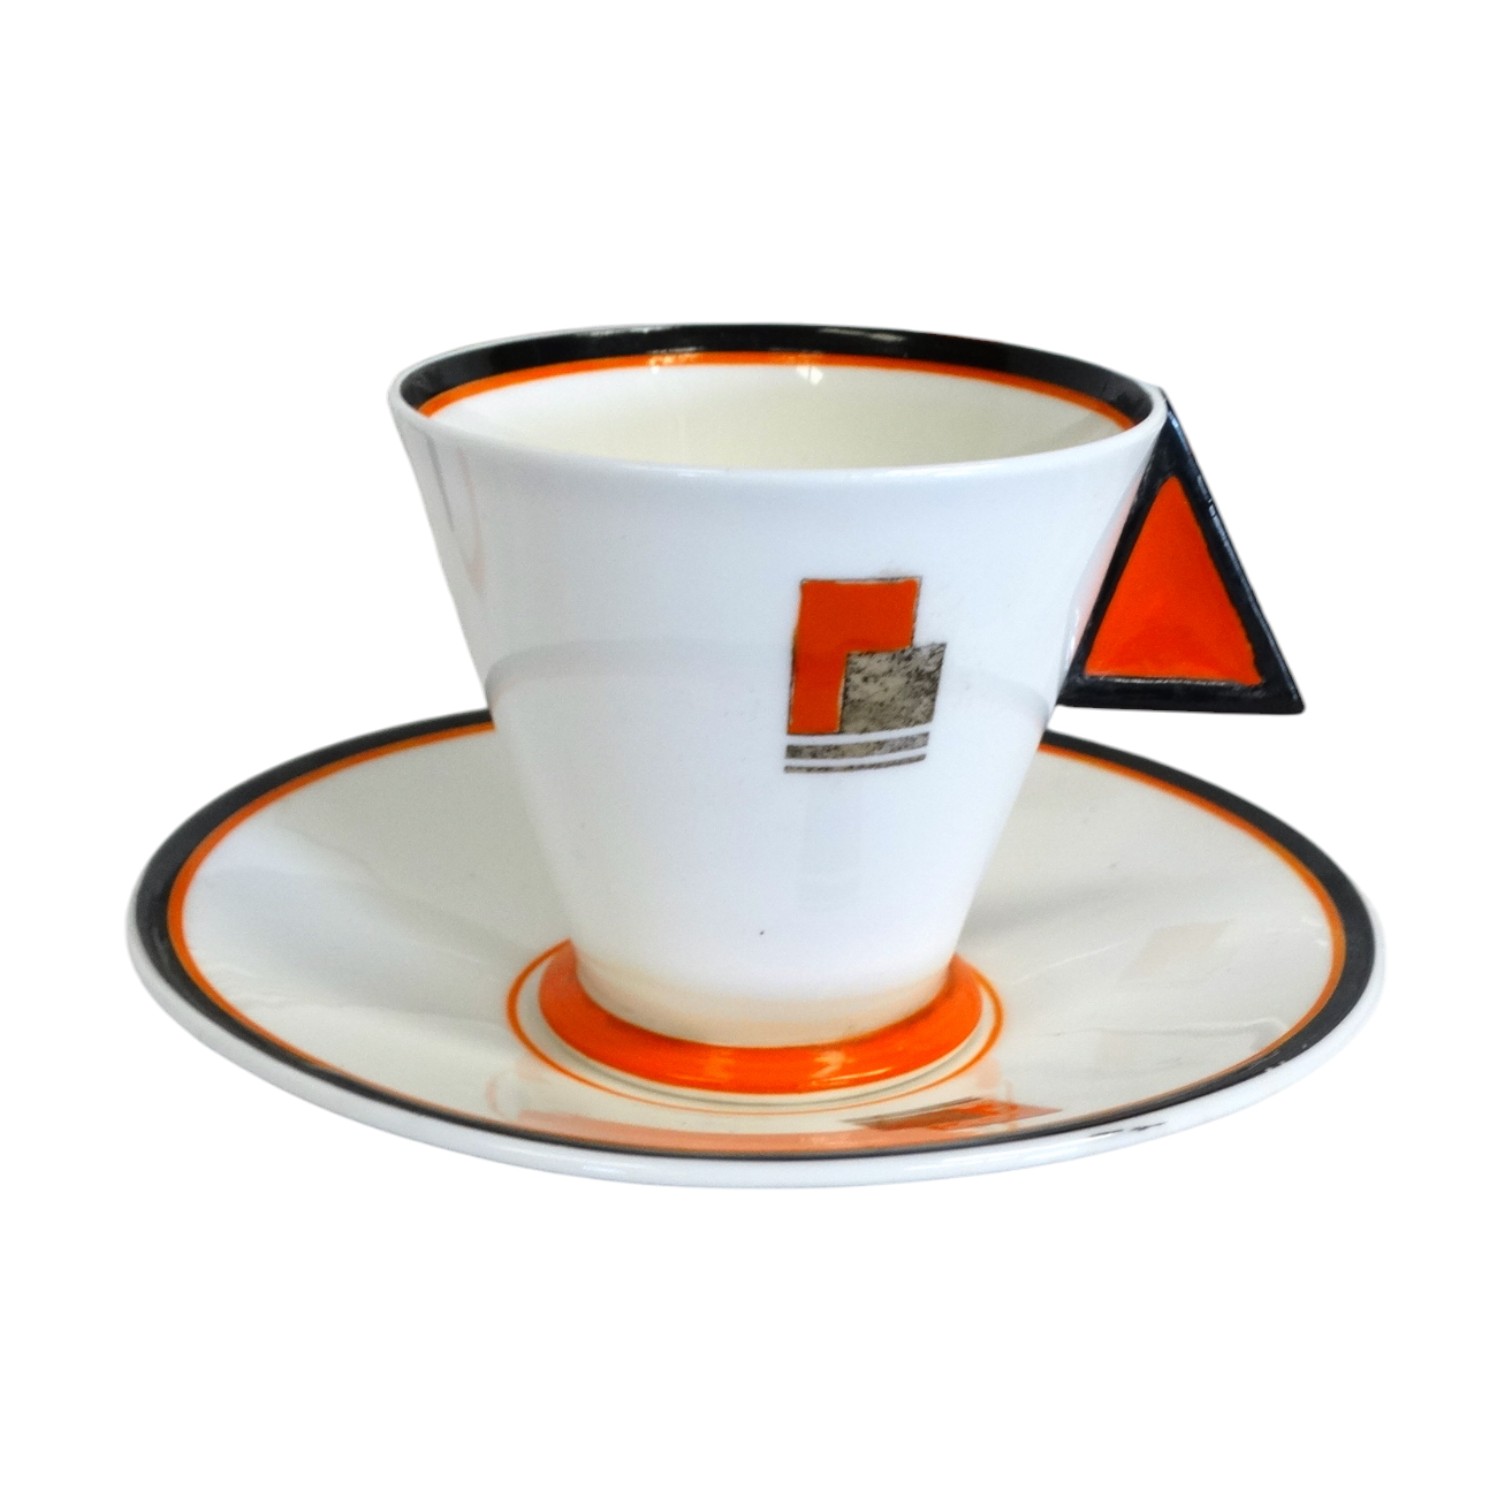 An extensive Shelley Art Deco dinner and tea service - decorated in orange and black on a white - Image 3 of 6